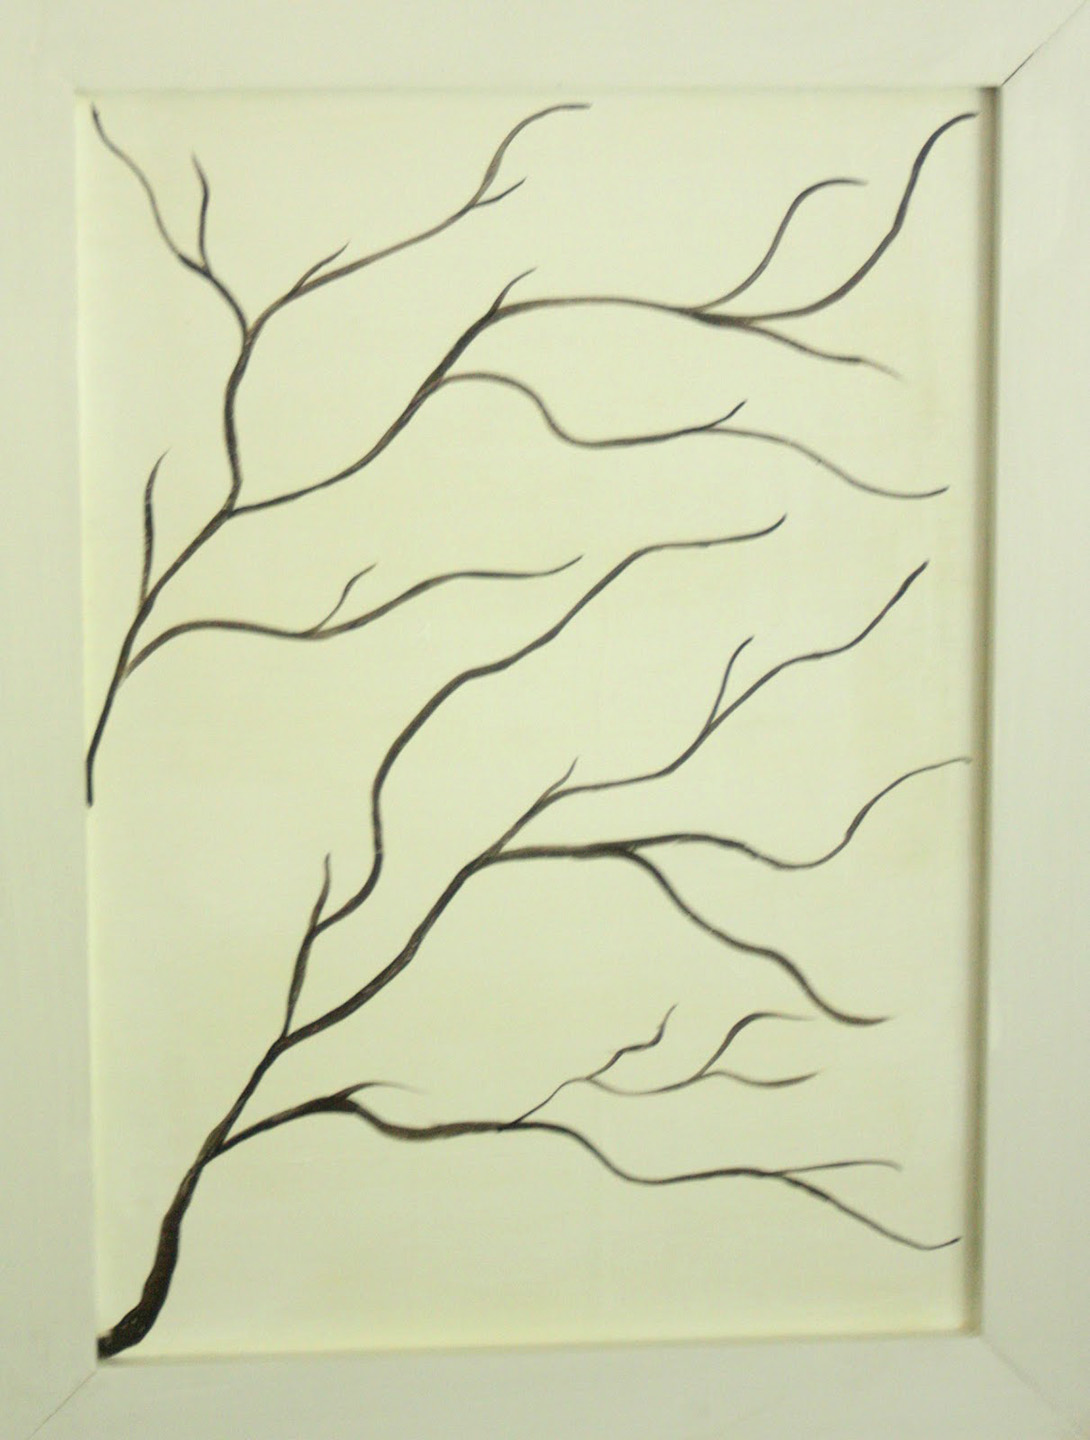 Cabinet door with Tree Branches painted on it